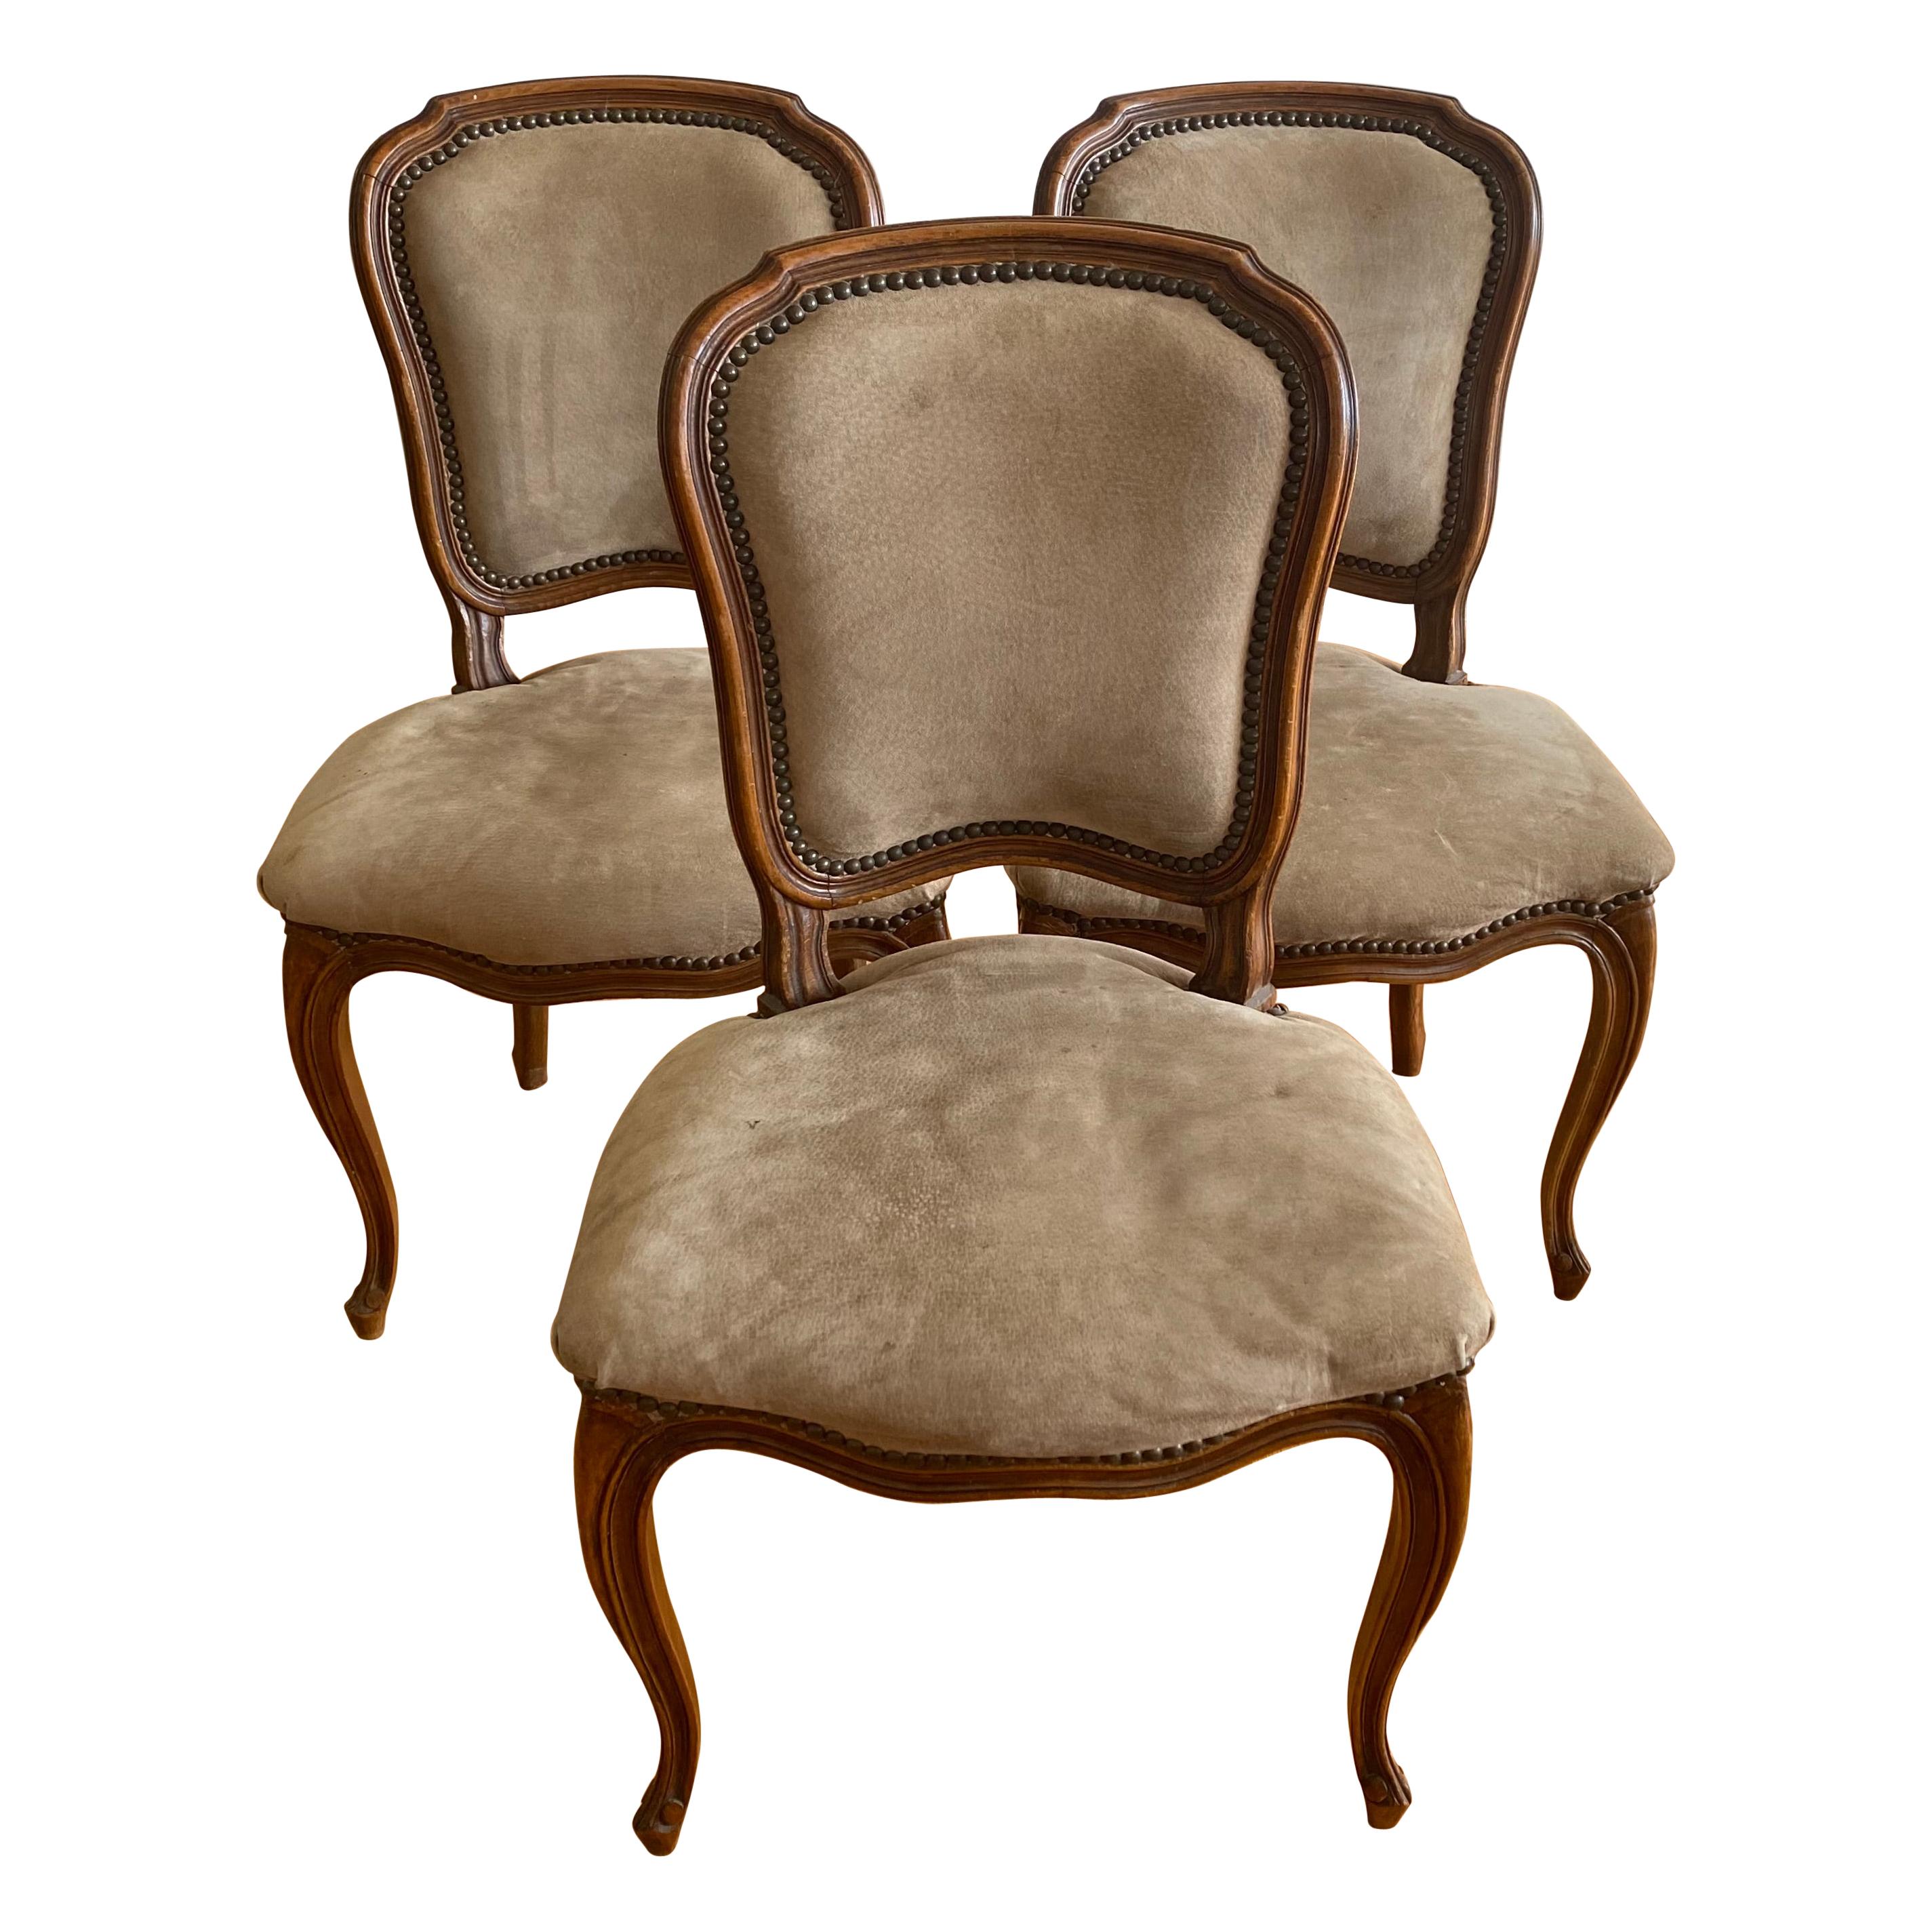 Three Early 20th Century French Walnut Carved Side Chairs, circa 1900